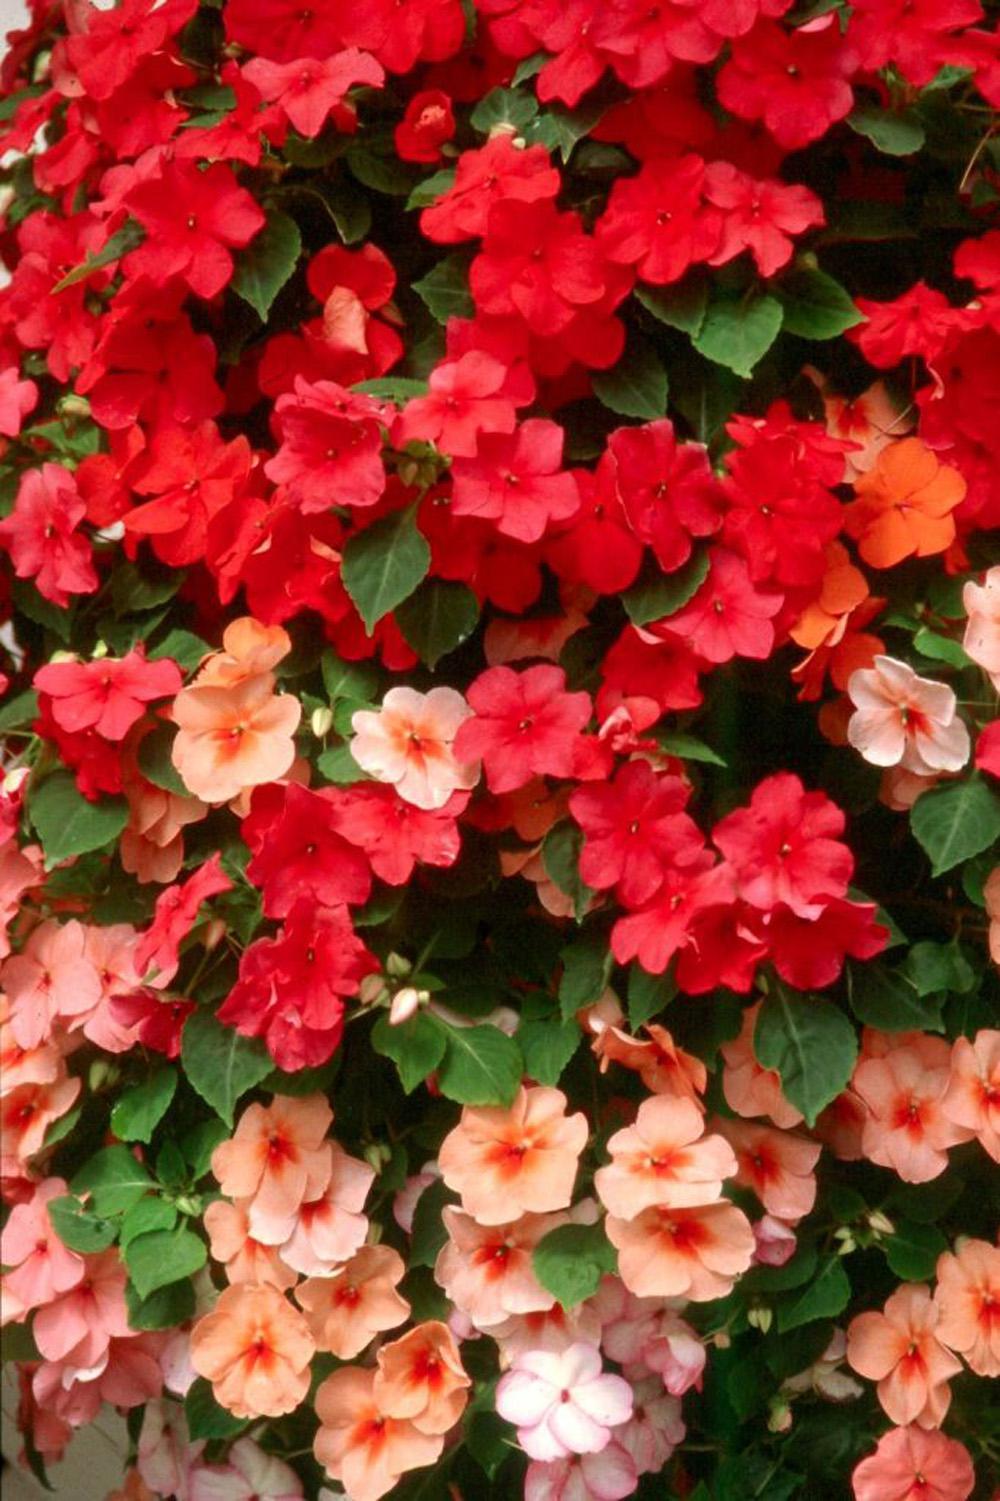 The Cancun Mix of Tempo Impatiens will literally pop out of the shady garden, making everyone take notice.